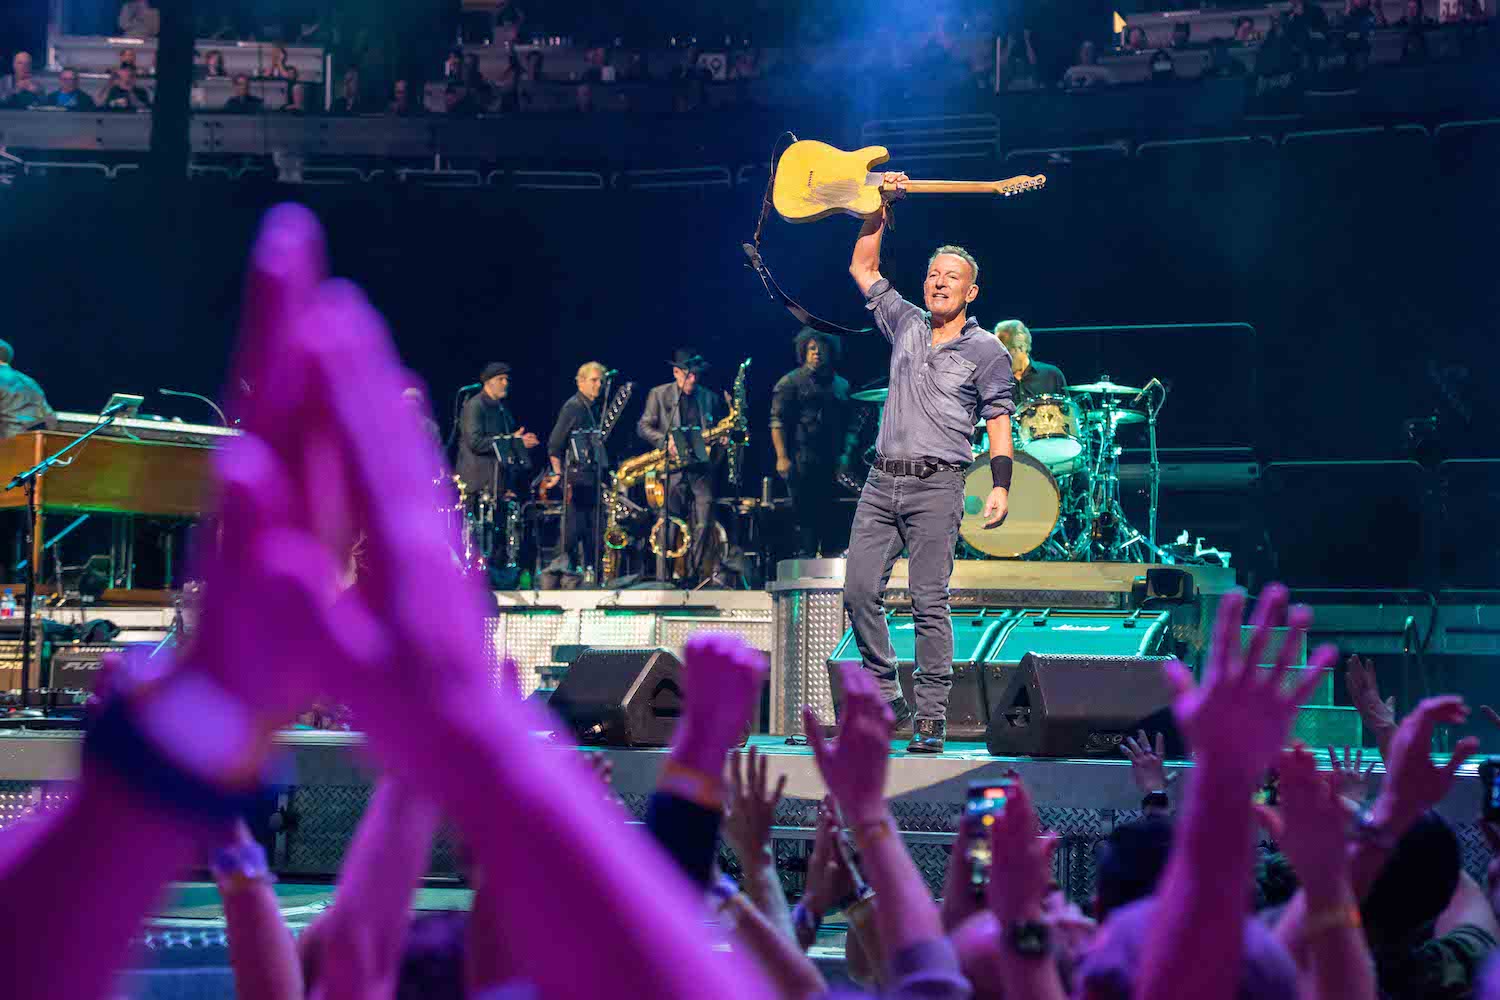 Bruce Springsteen & E Street Band at UBS Arena, Belmont Park, NY on April 9, 2023.